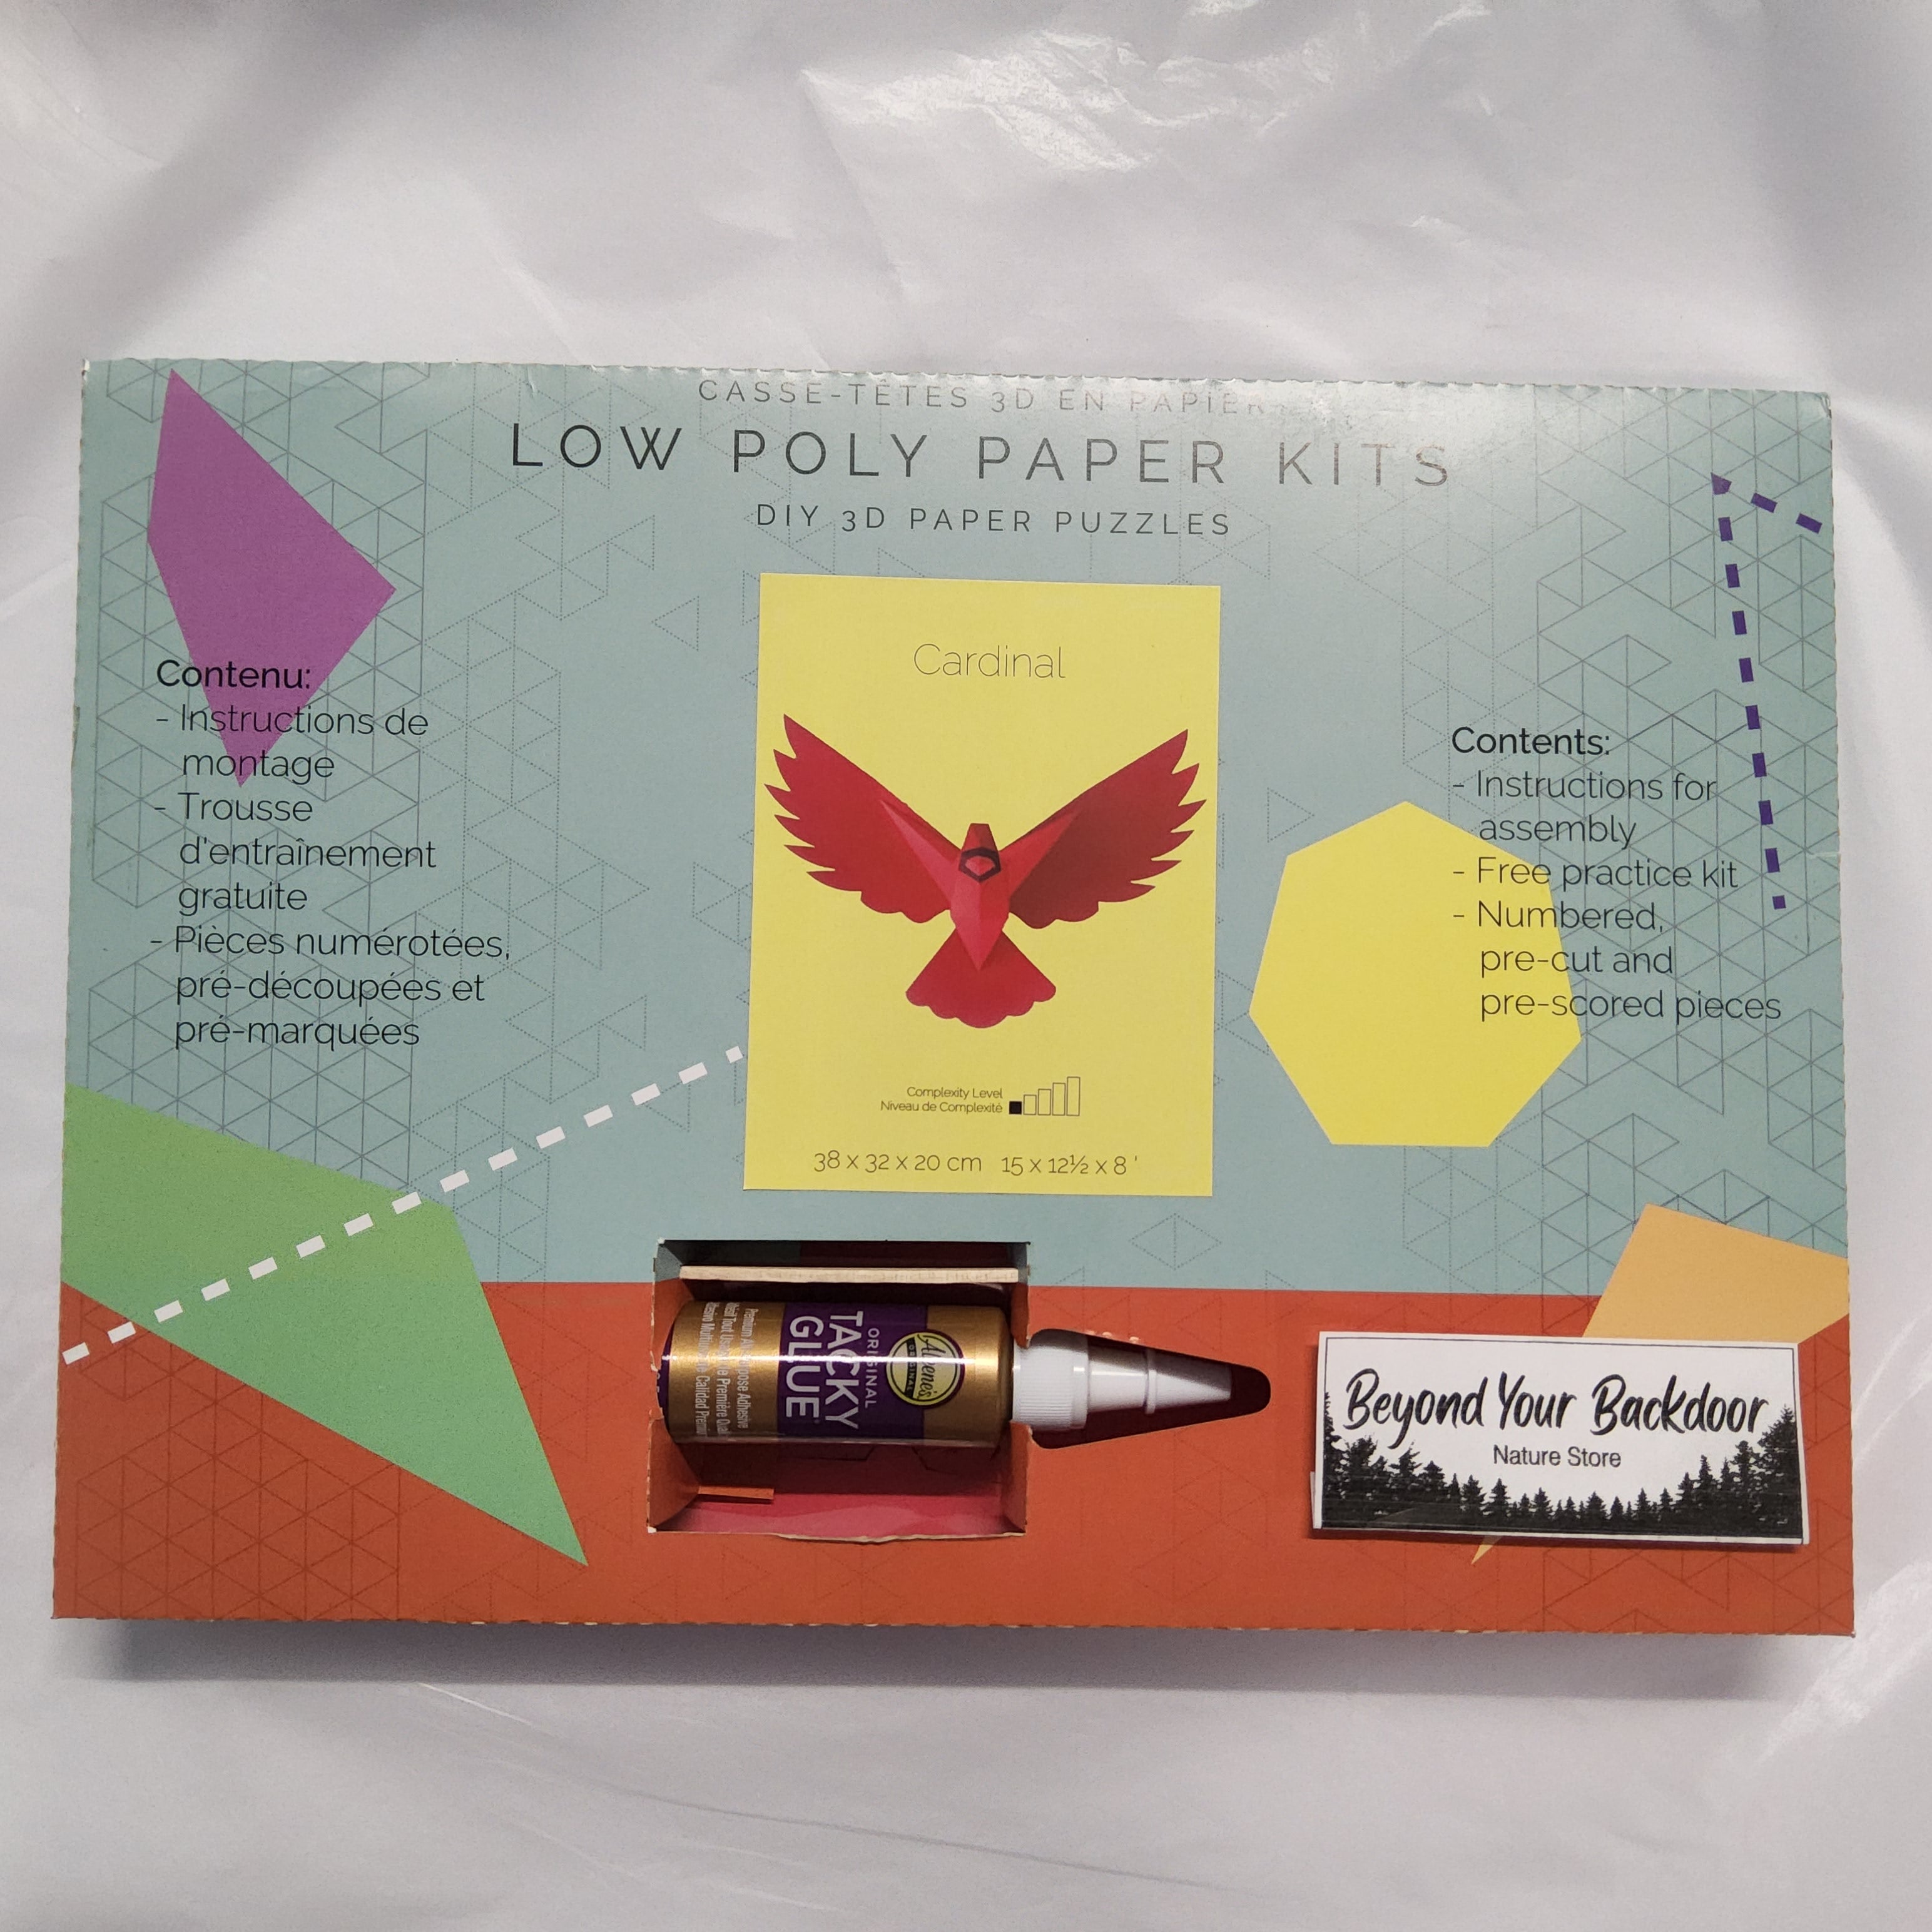 Low Poly Paper Kits - with glue and bamboo stick included - Song Birds in Flight - Assorted Designs